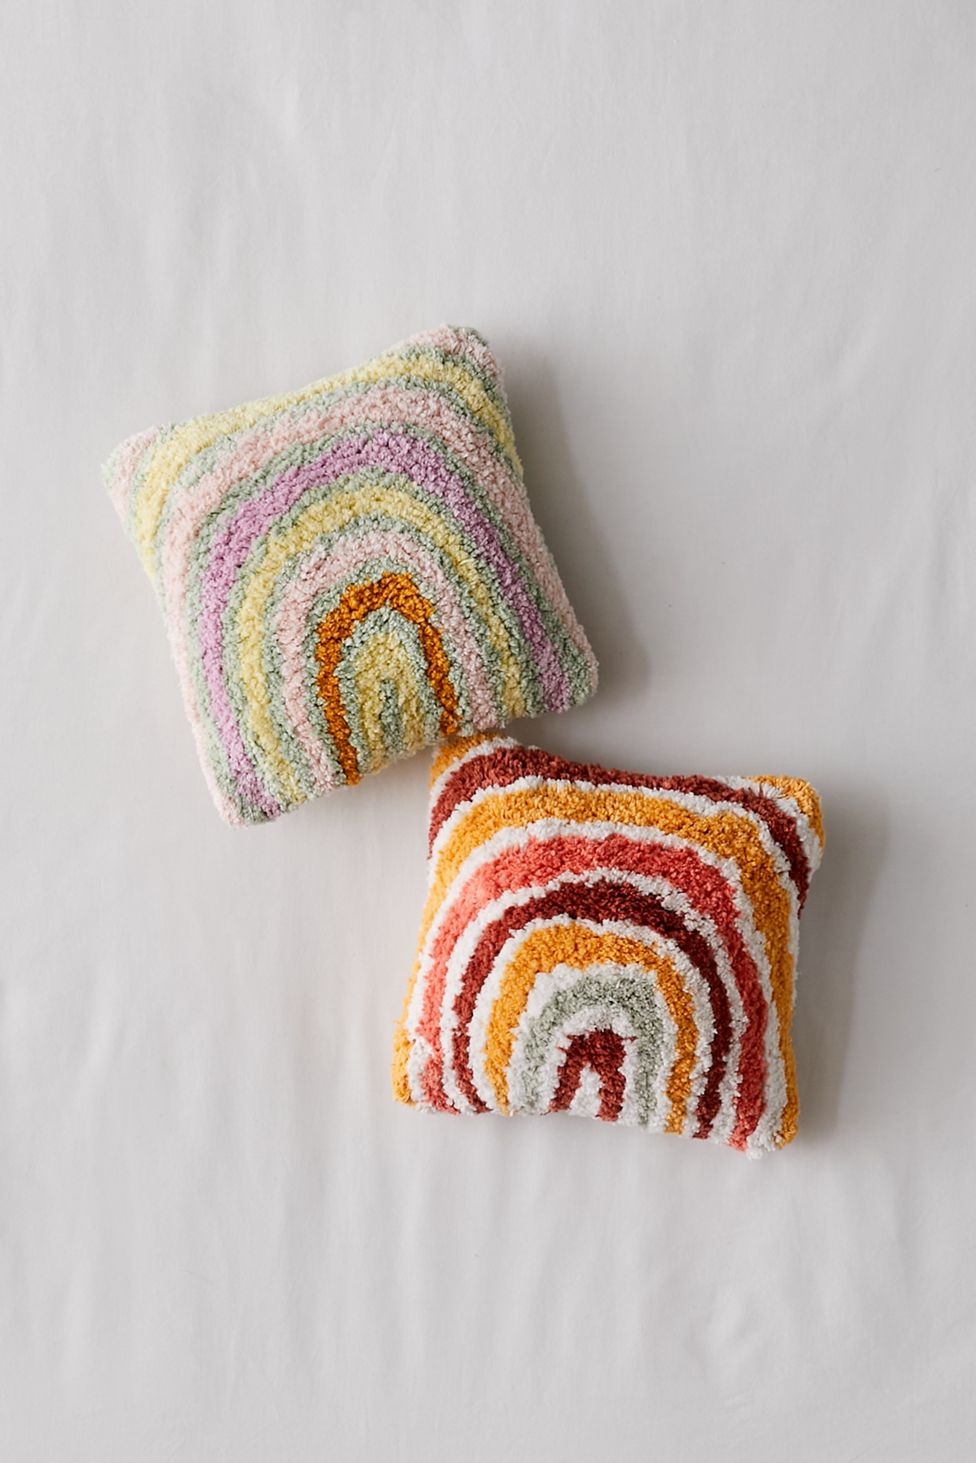 Mini Rainbow Boho Pillow for a Touch of Whimsy